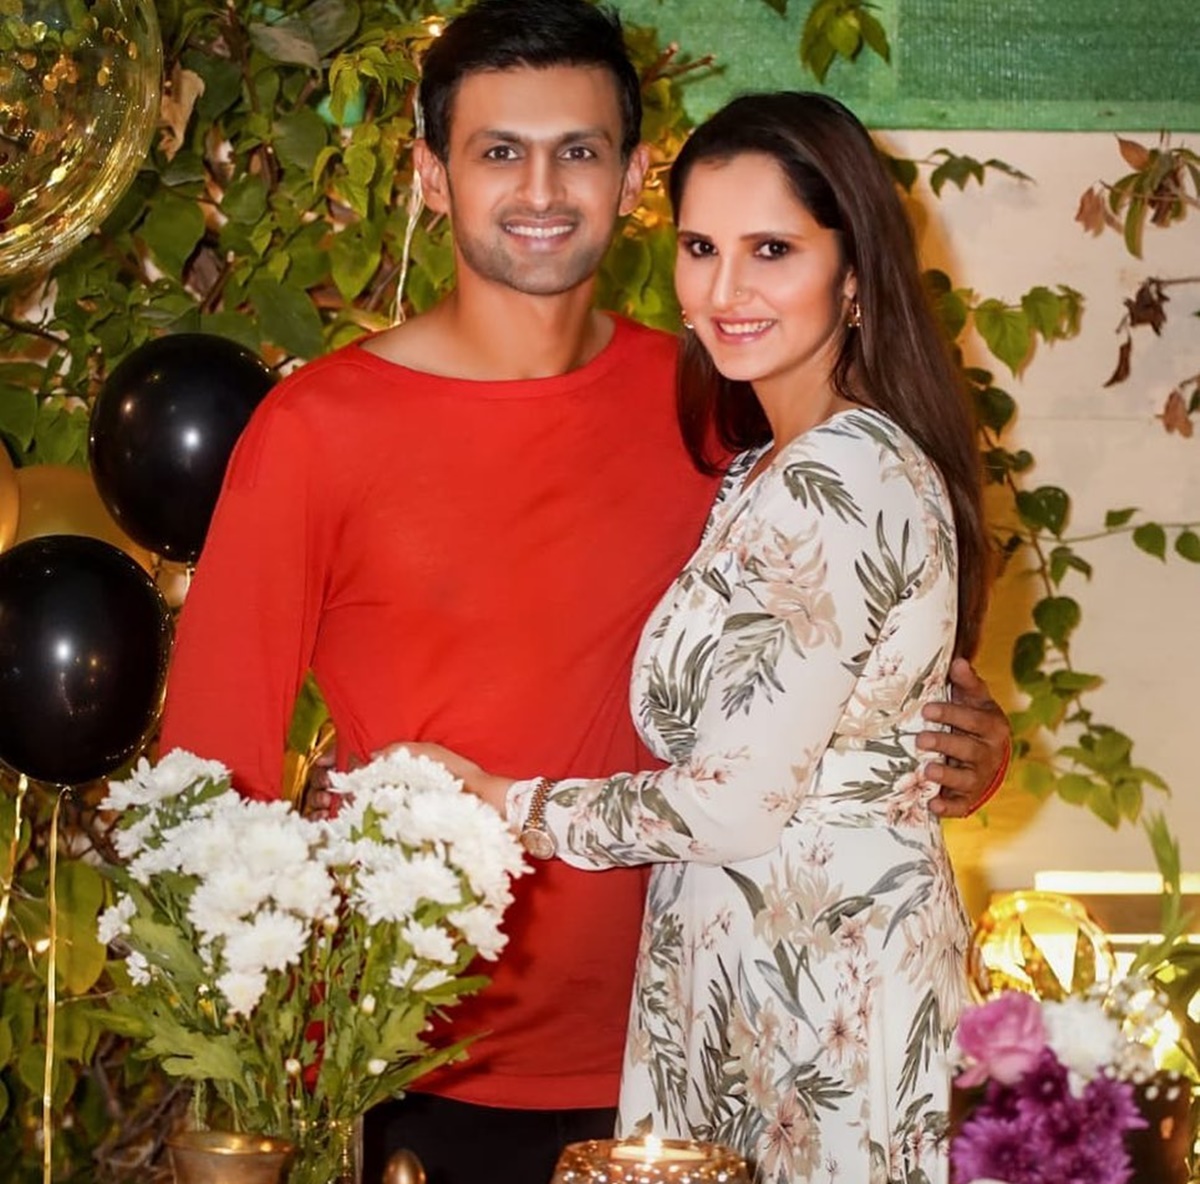 Did Shoaib cheat on Sania while they were married?